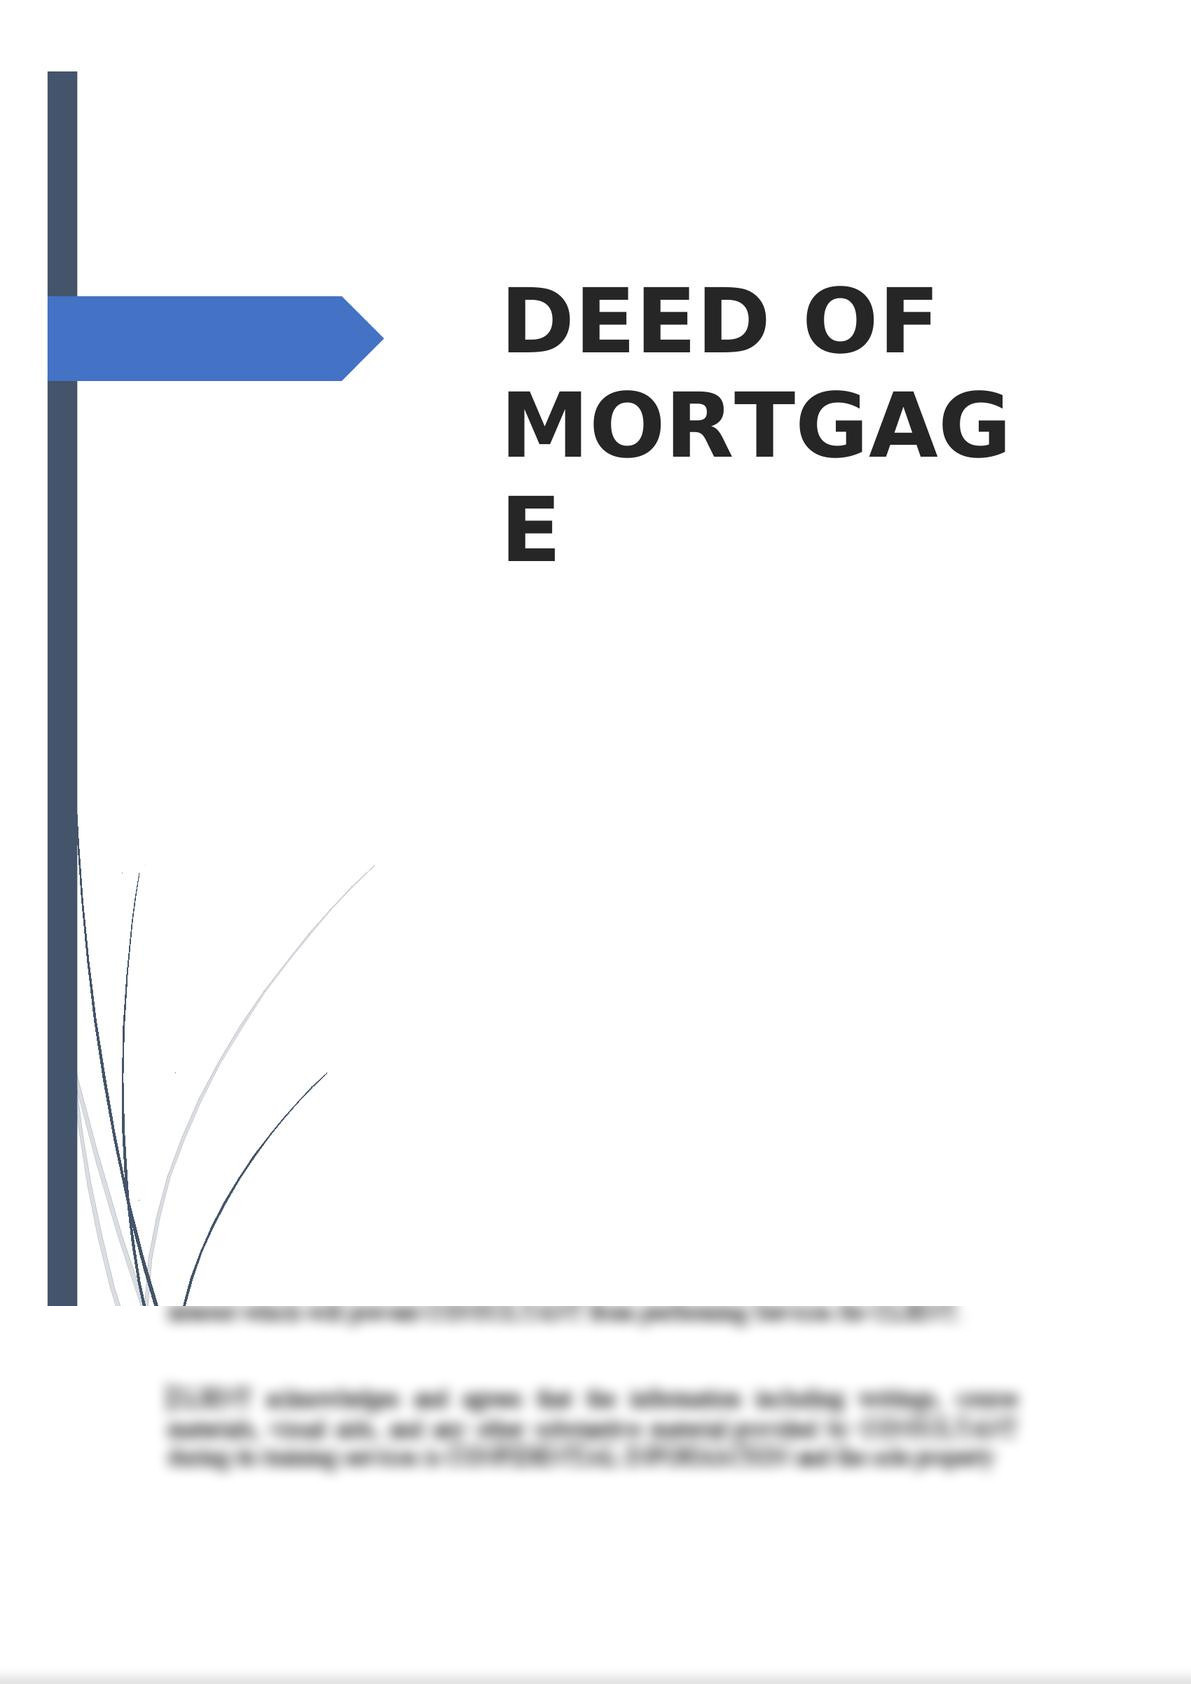 Deed of Mortgage -0